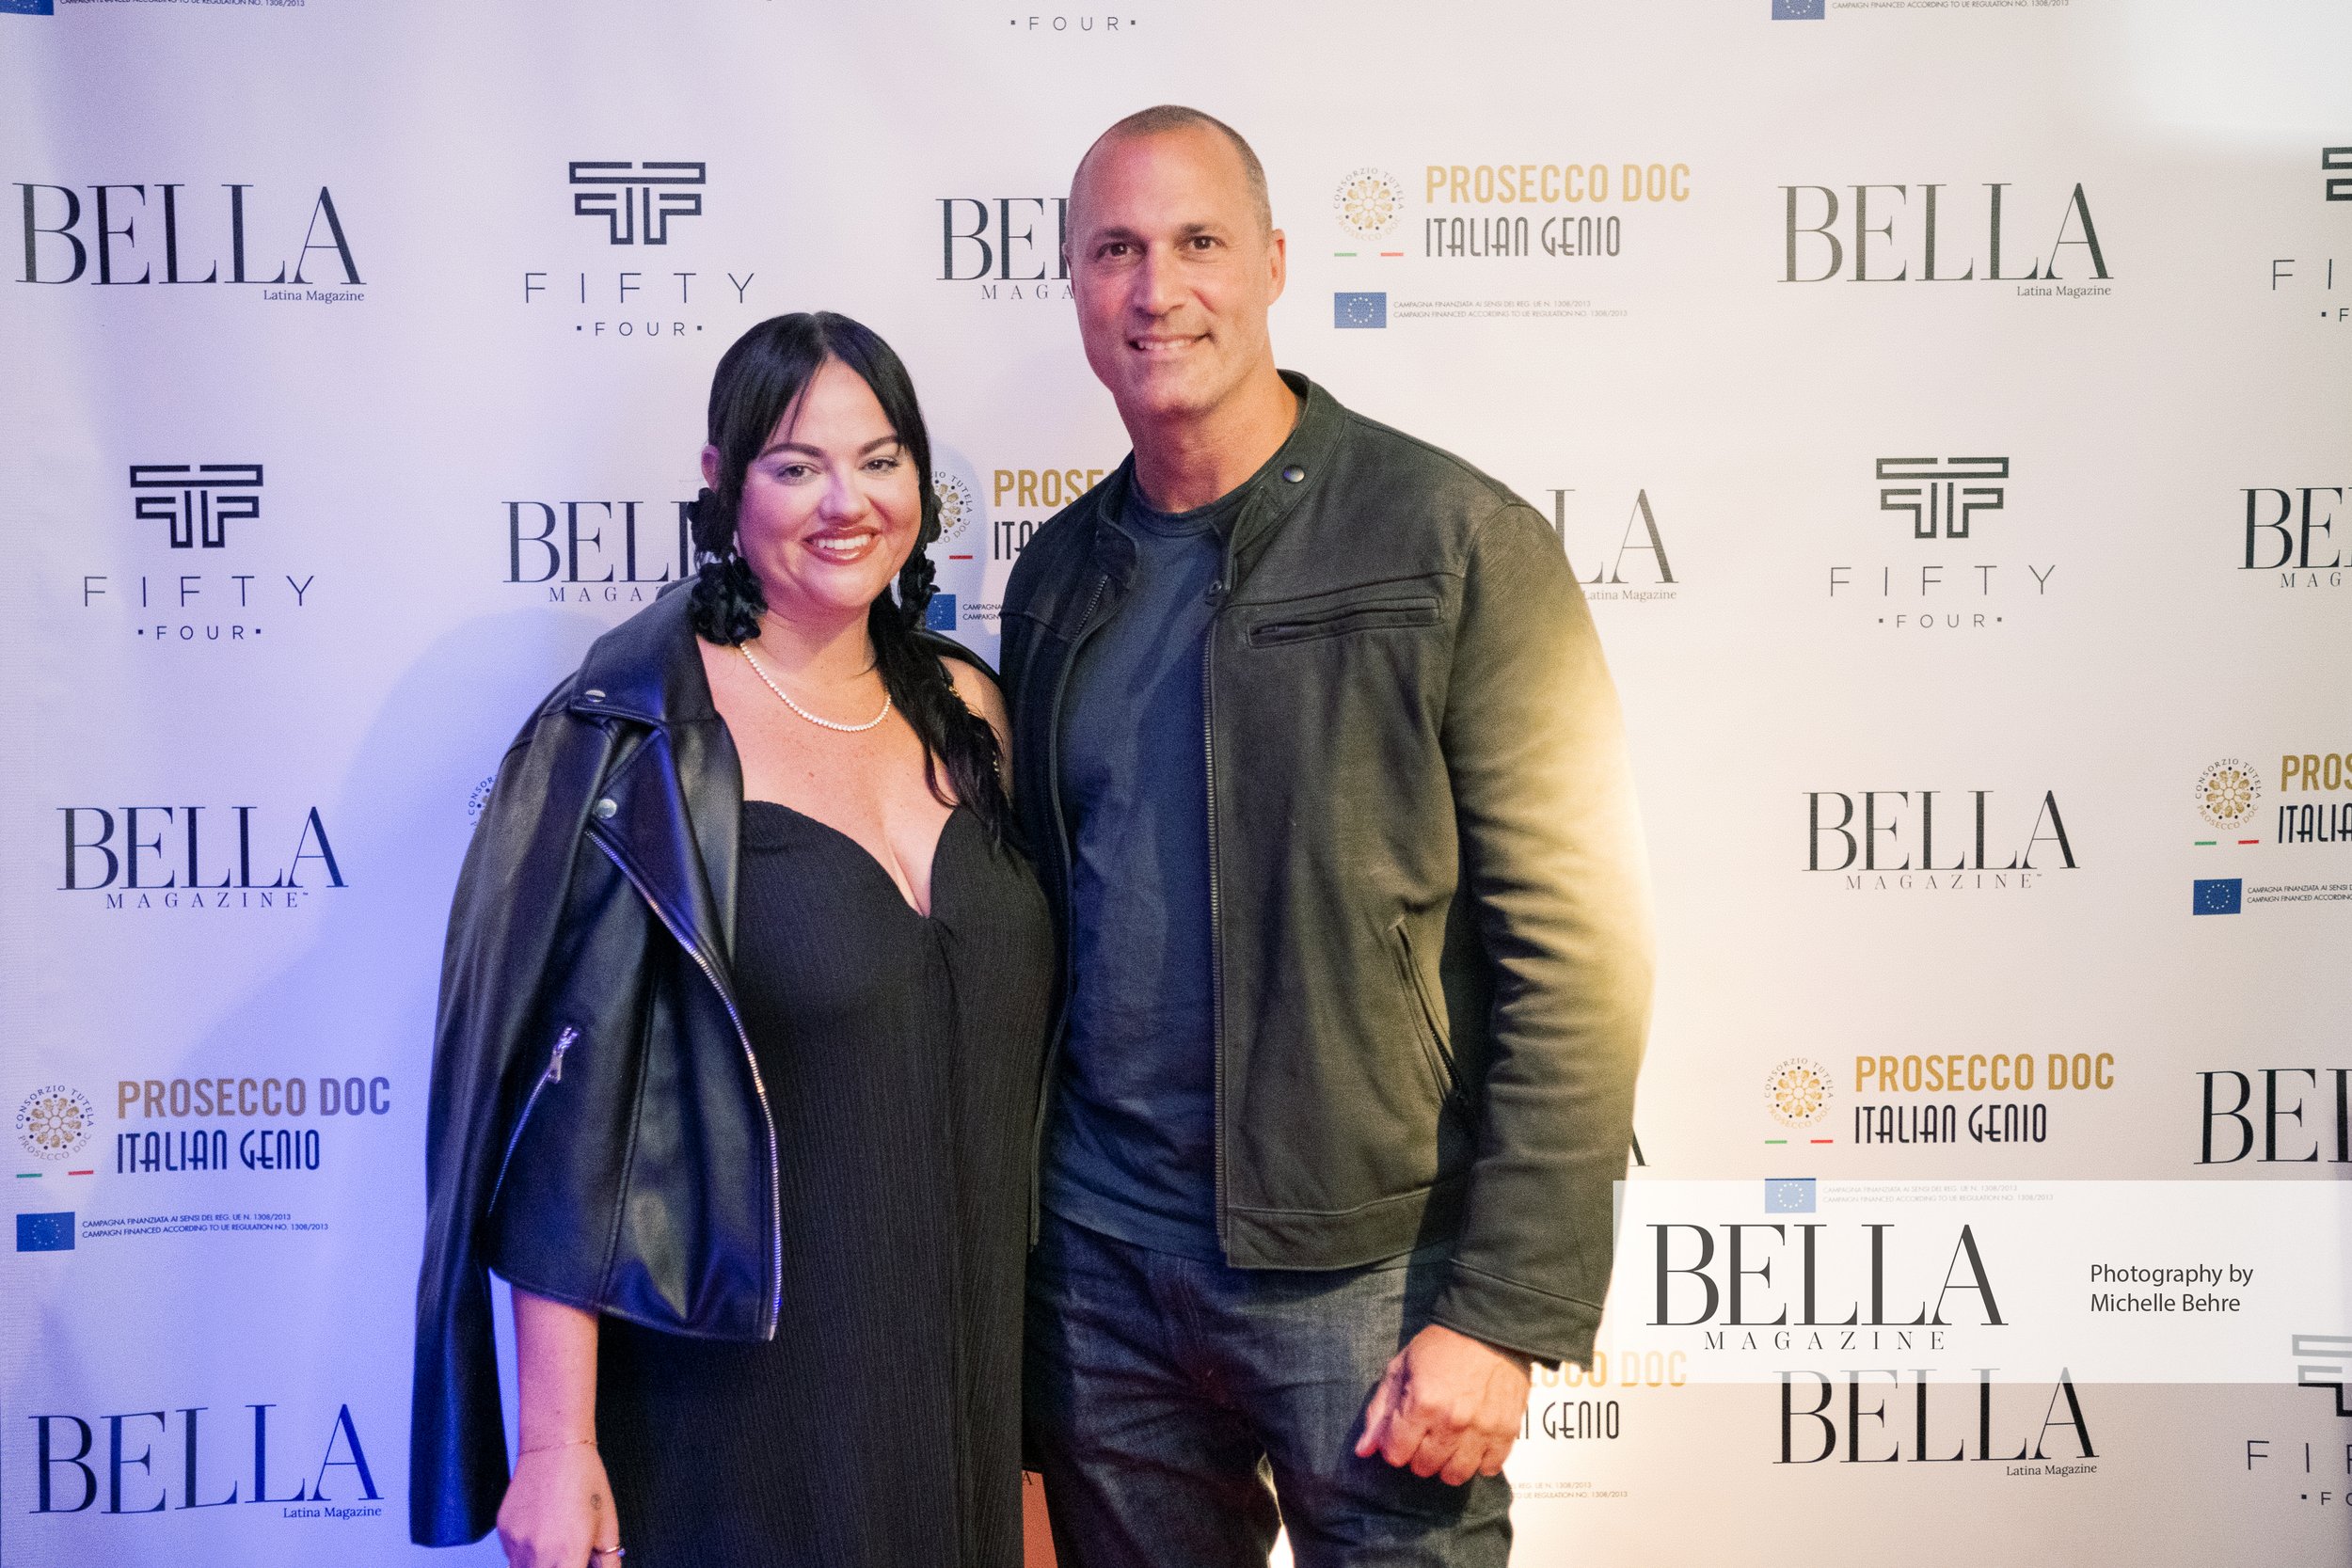 BELLA-Magazine-September-Issue-Cover-Event-Fifty-Four-139 2.jpg